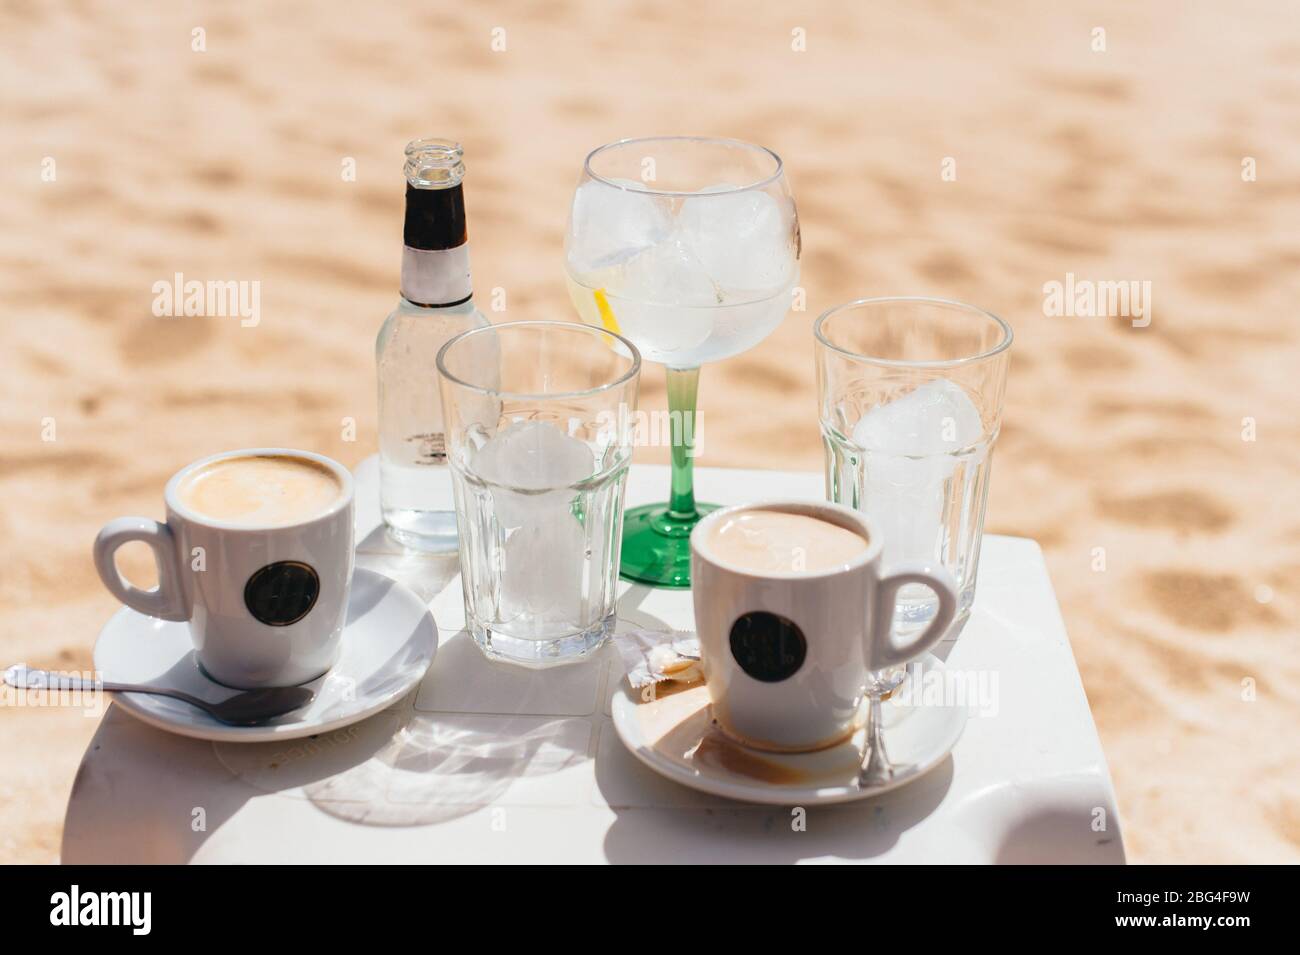 Coffees and cocktails at the beach no people Stock Photo